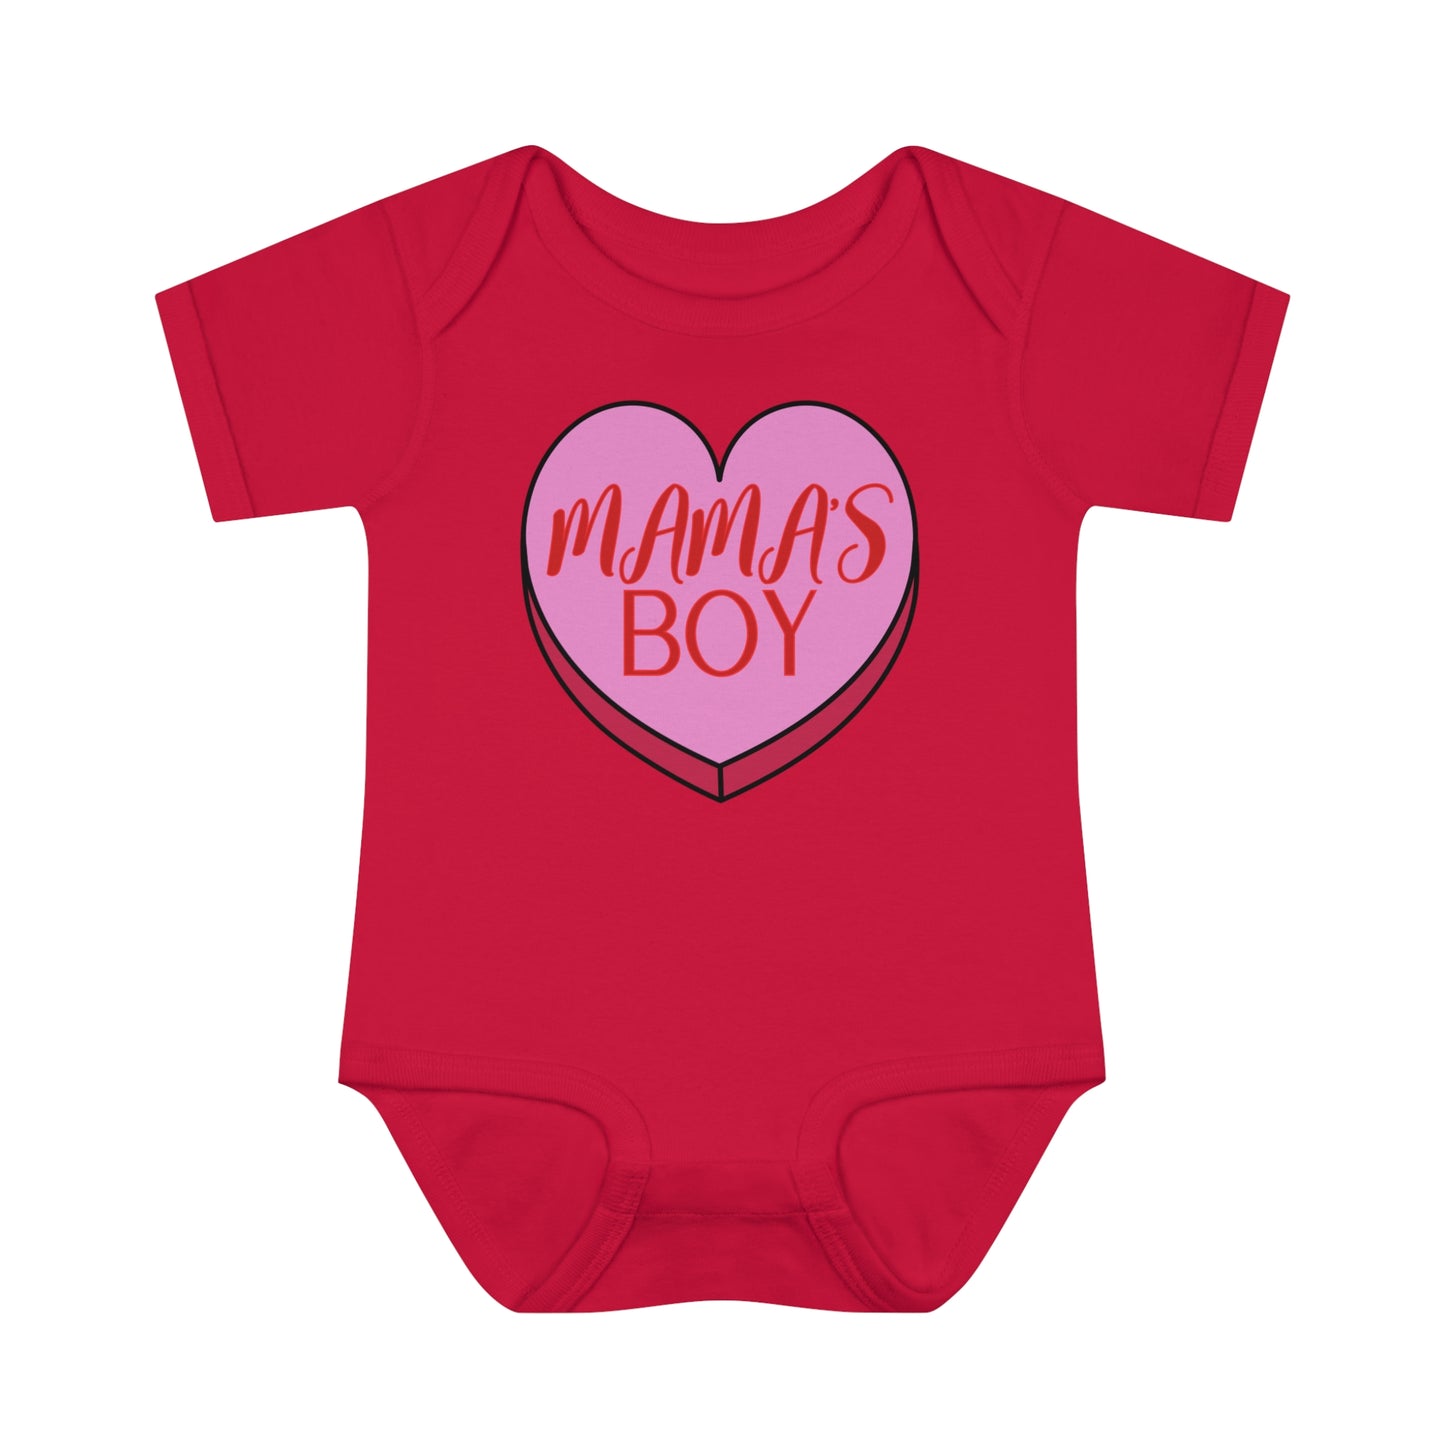 Mama's Boy | Valentine's Outfit for Baby Boy | Infant Bodysuit